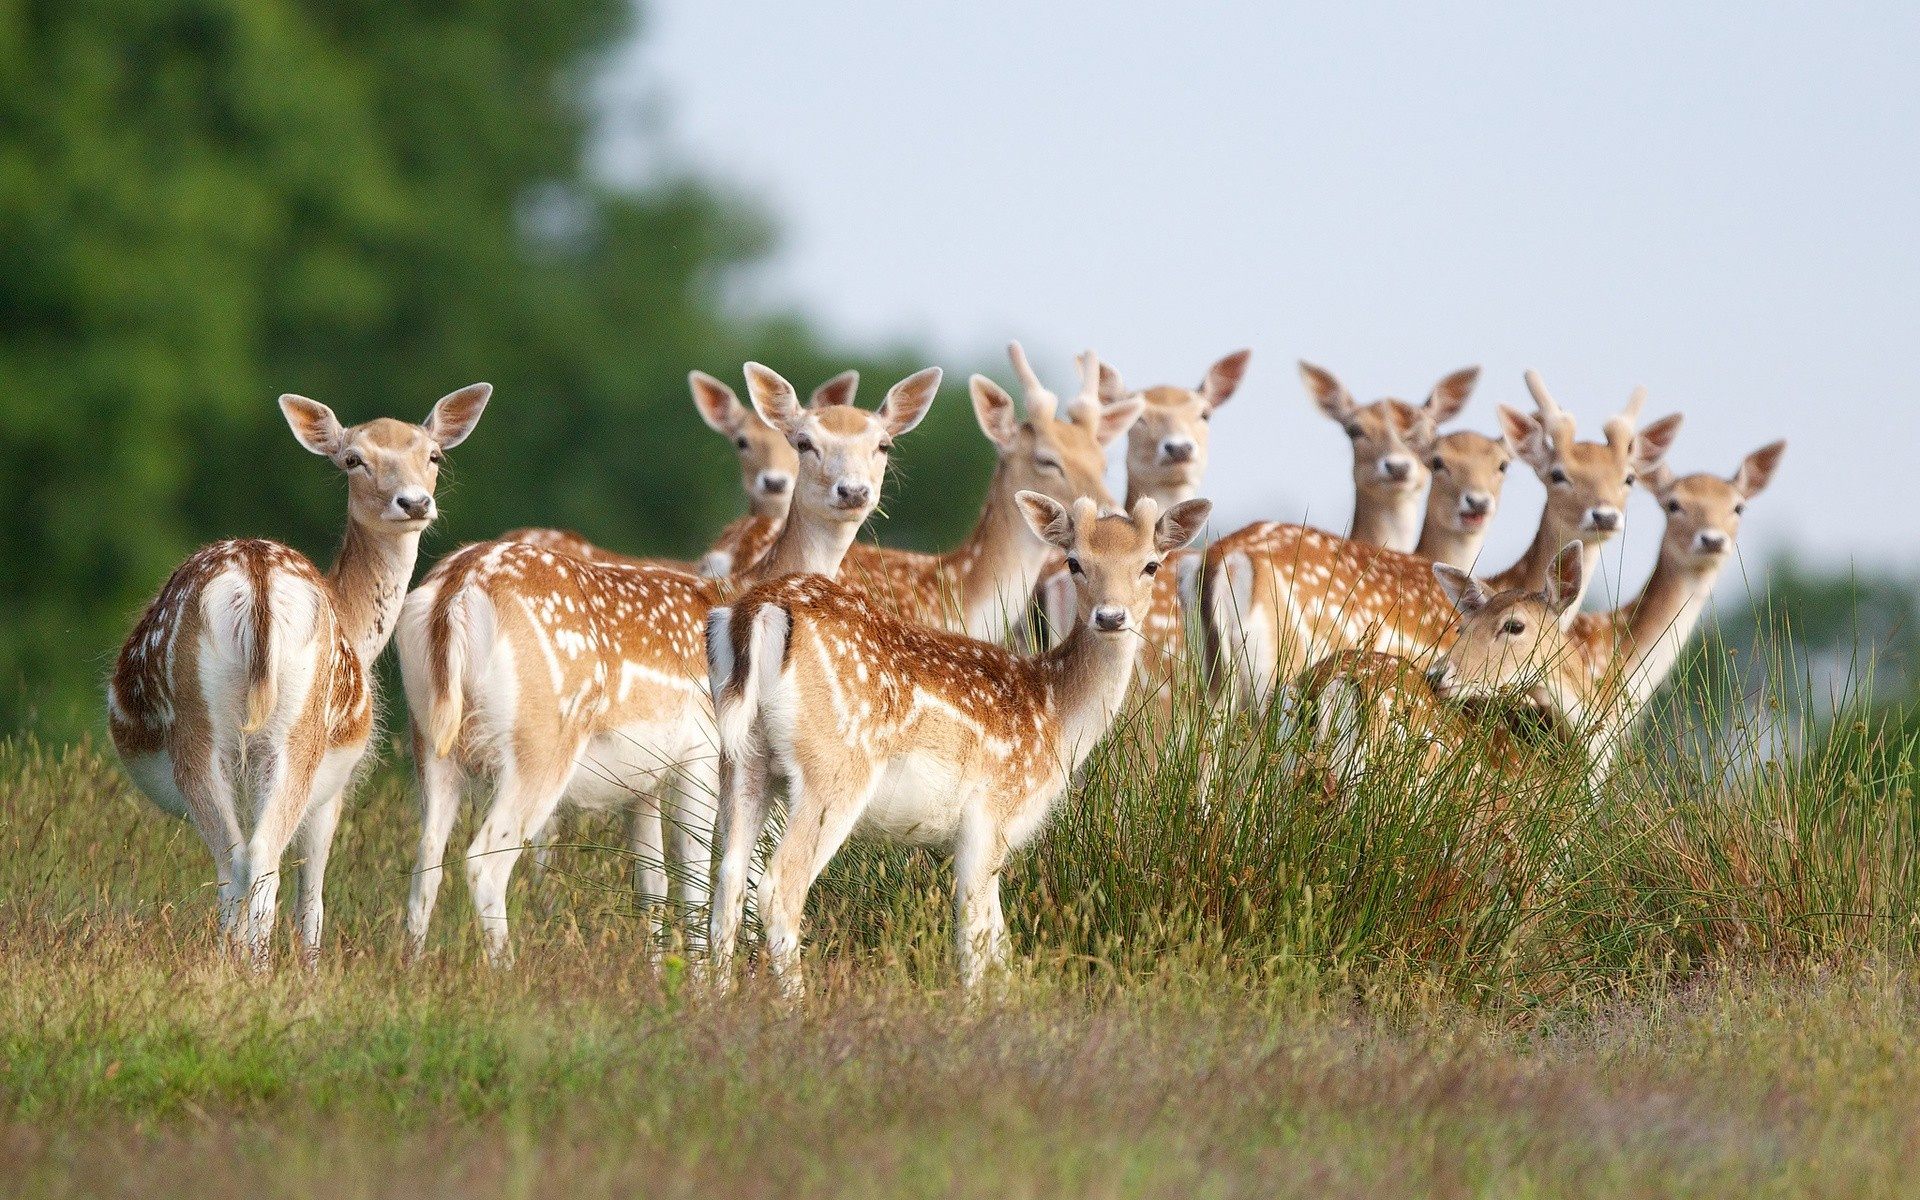 What is a group of deer called in English?